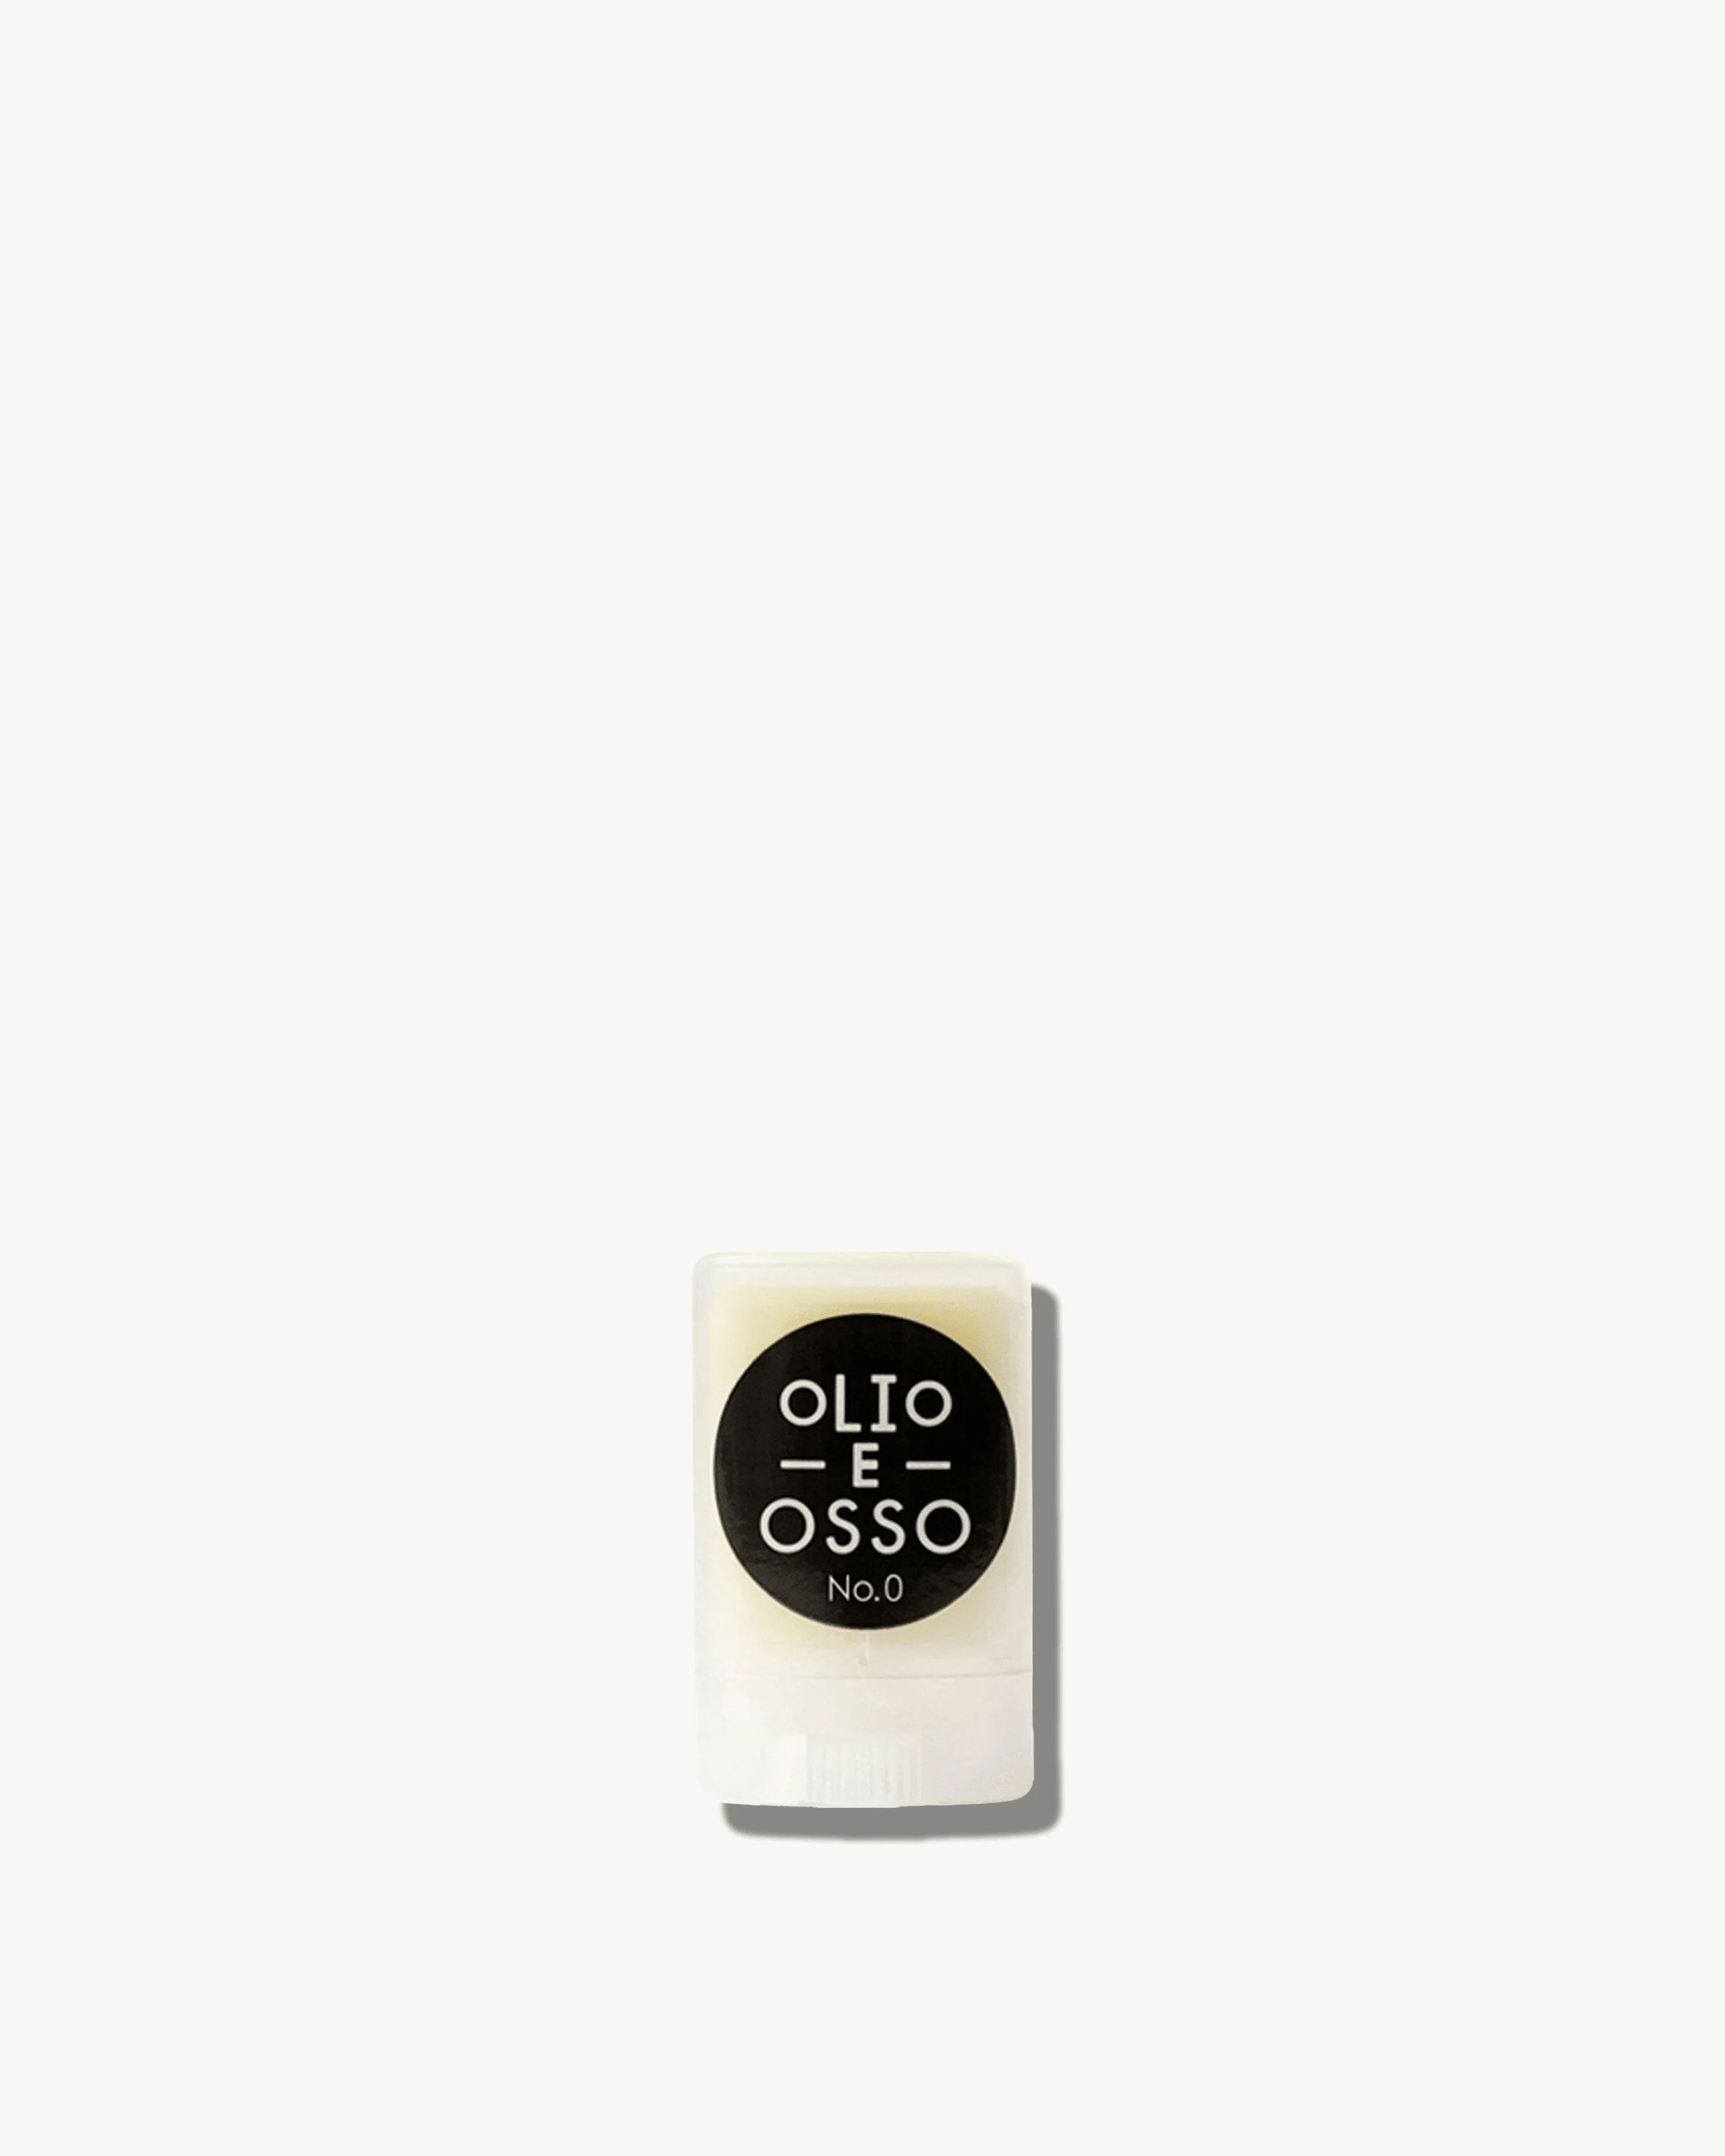 Olio E Osso Tinted Balms - Clean, Natural Tinted Multi-Use Balms by Olio E Osso | Credo Beauty